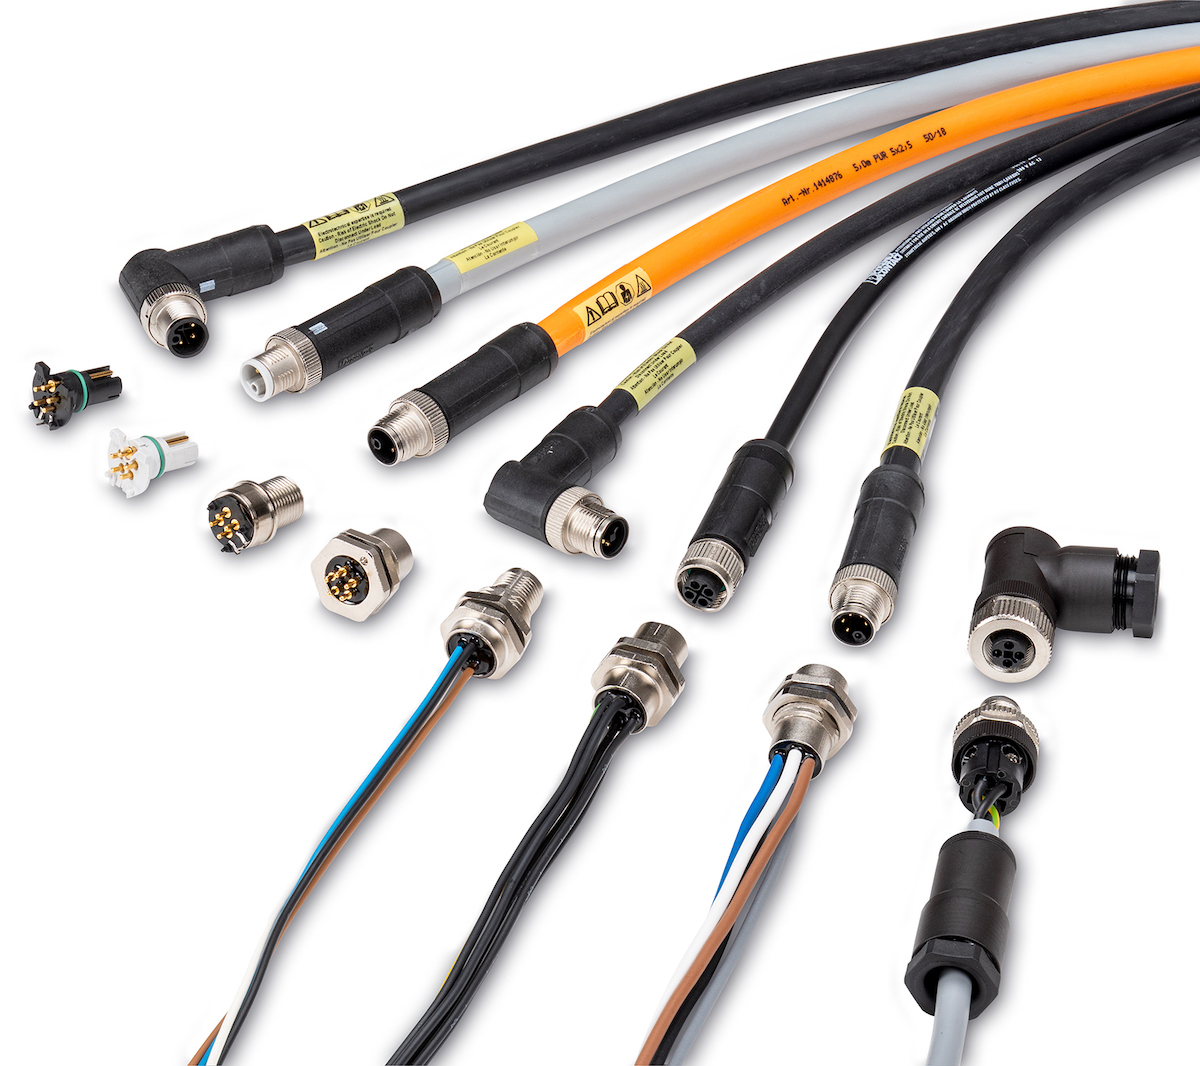 New Connectivity Products: October 2019 - Phoenix Contact M12 Power Cables and Connectors